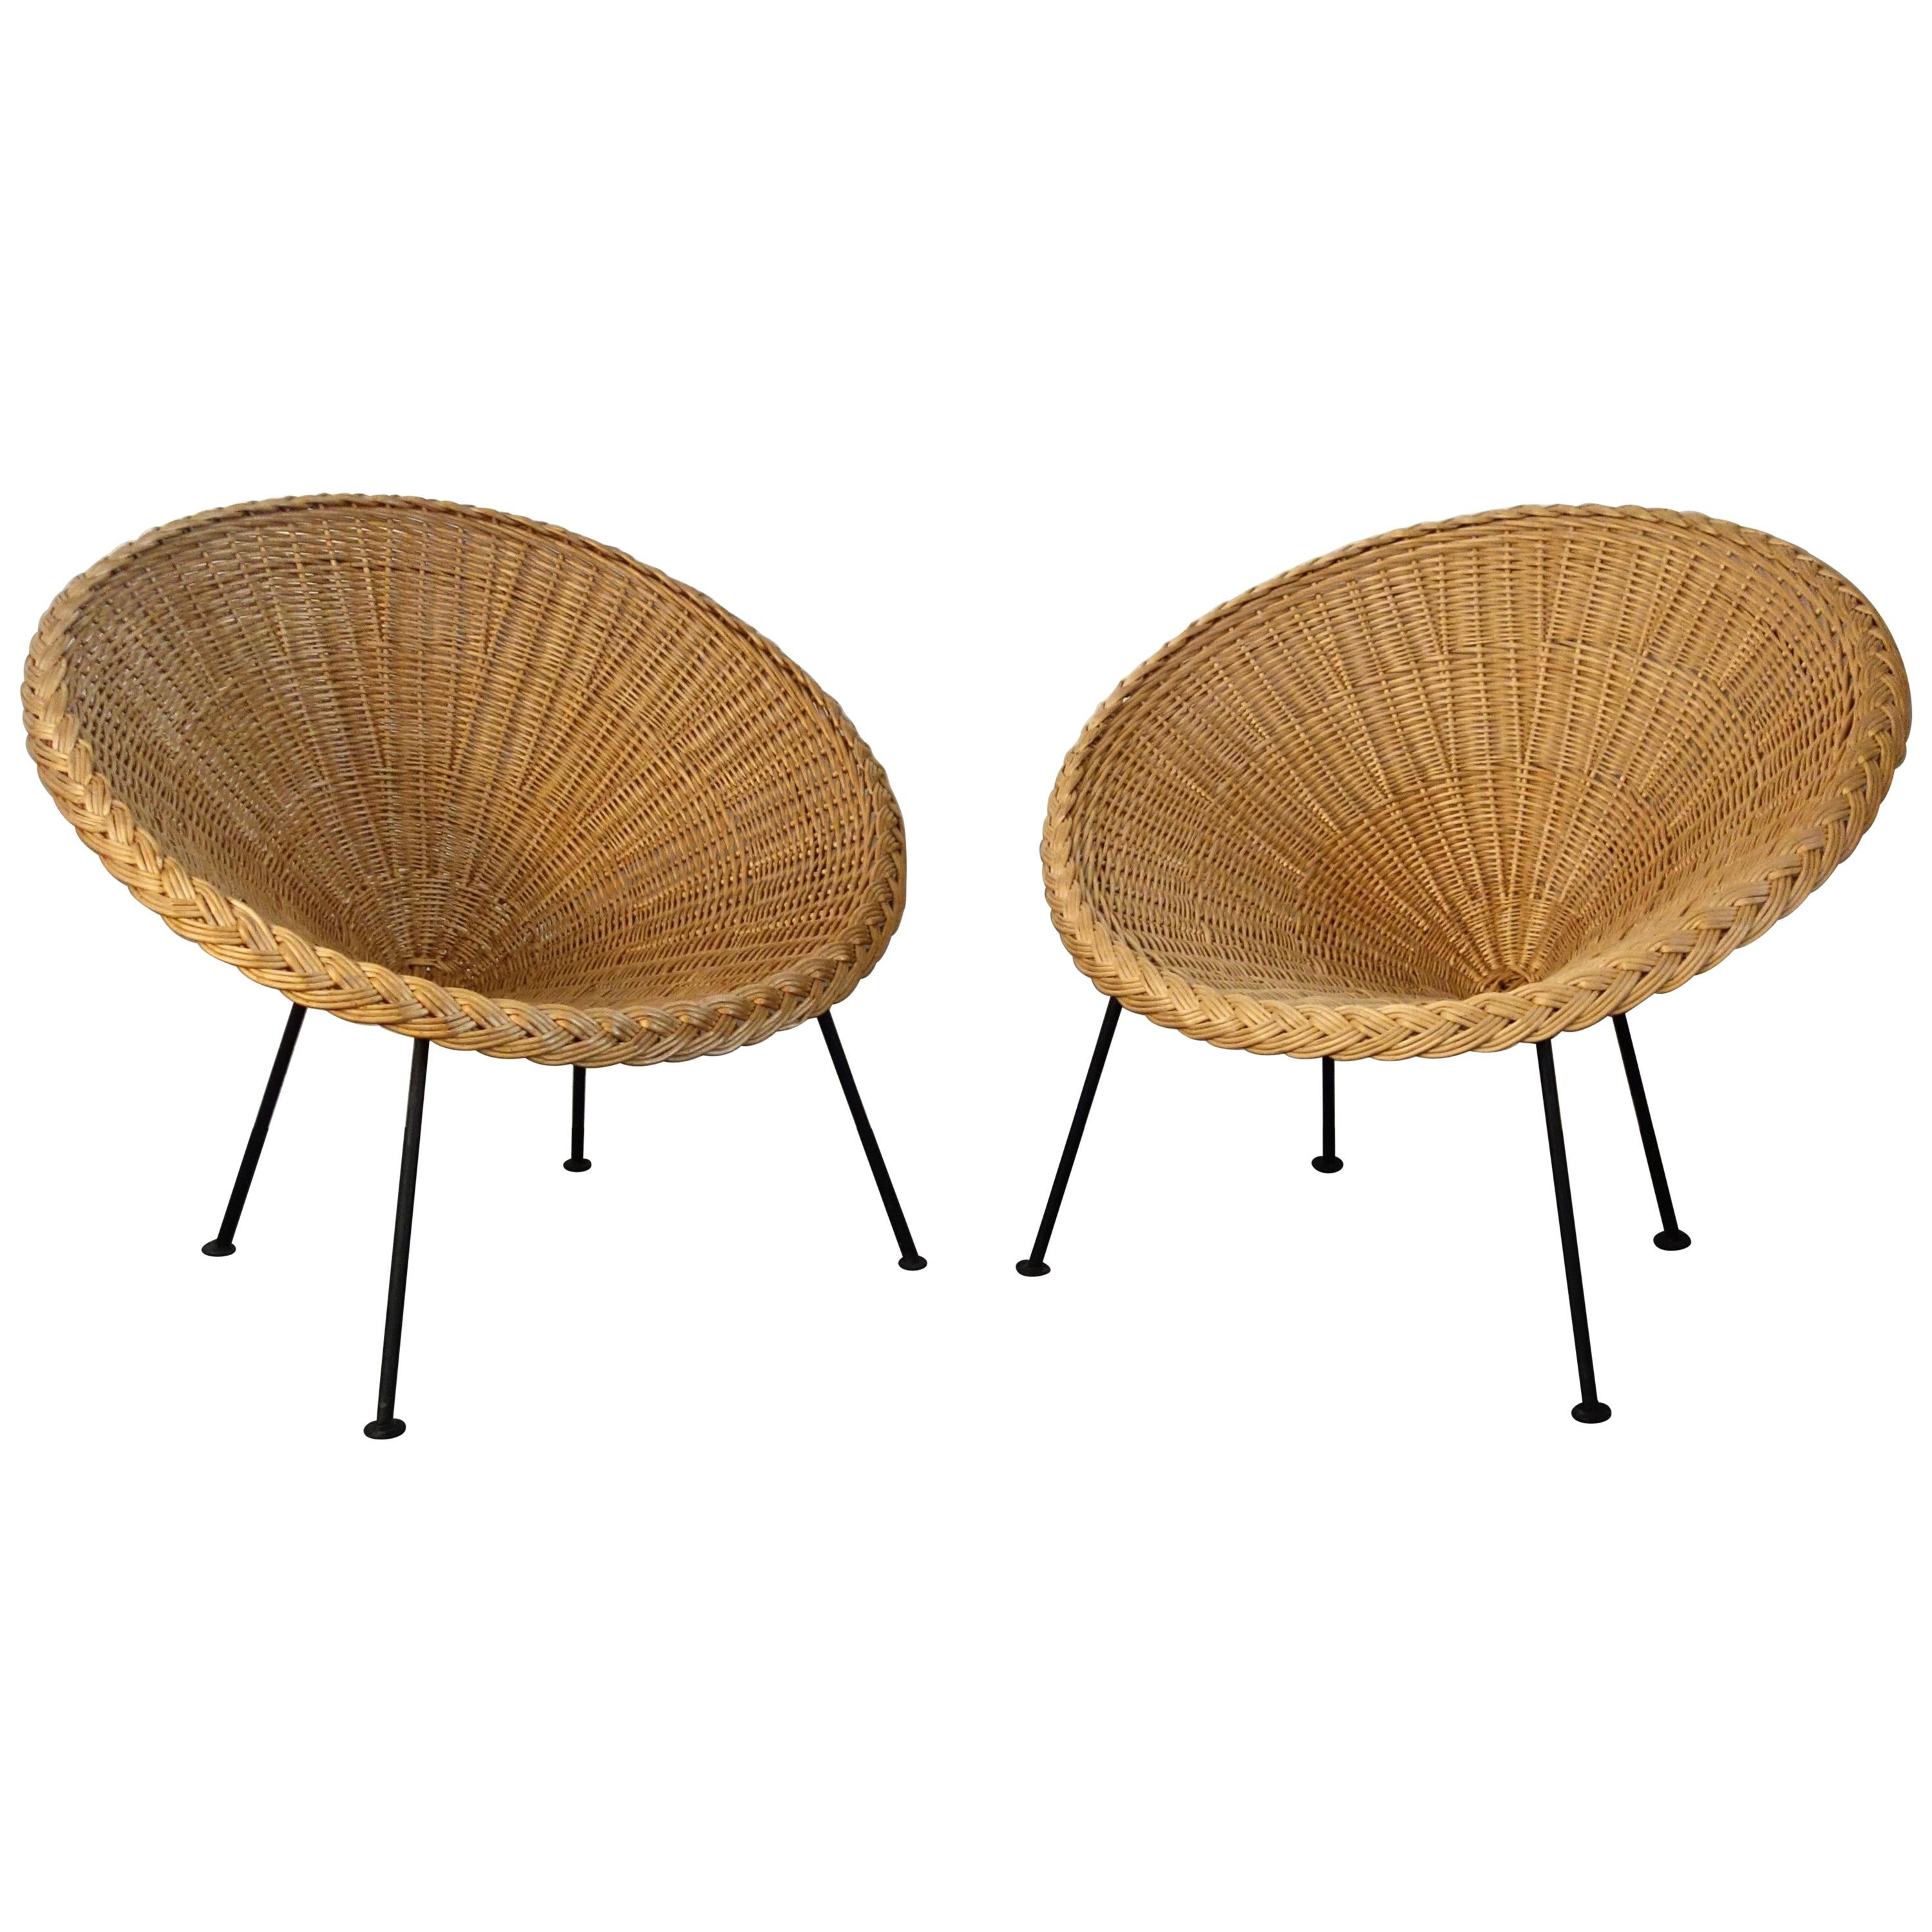 Pair of French Rattan Baskets Armchairs, 1950s